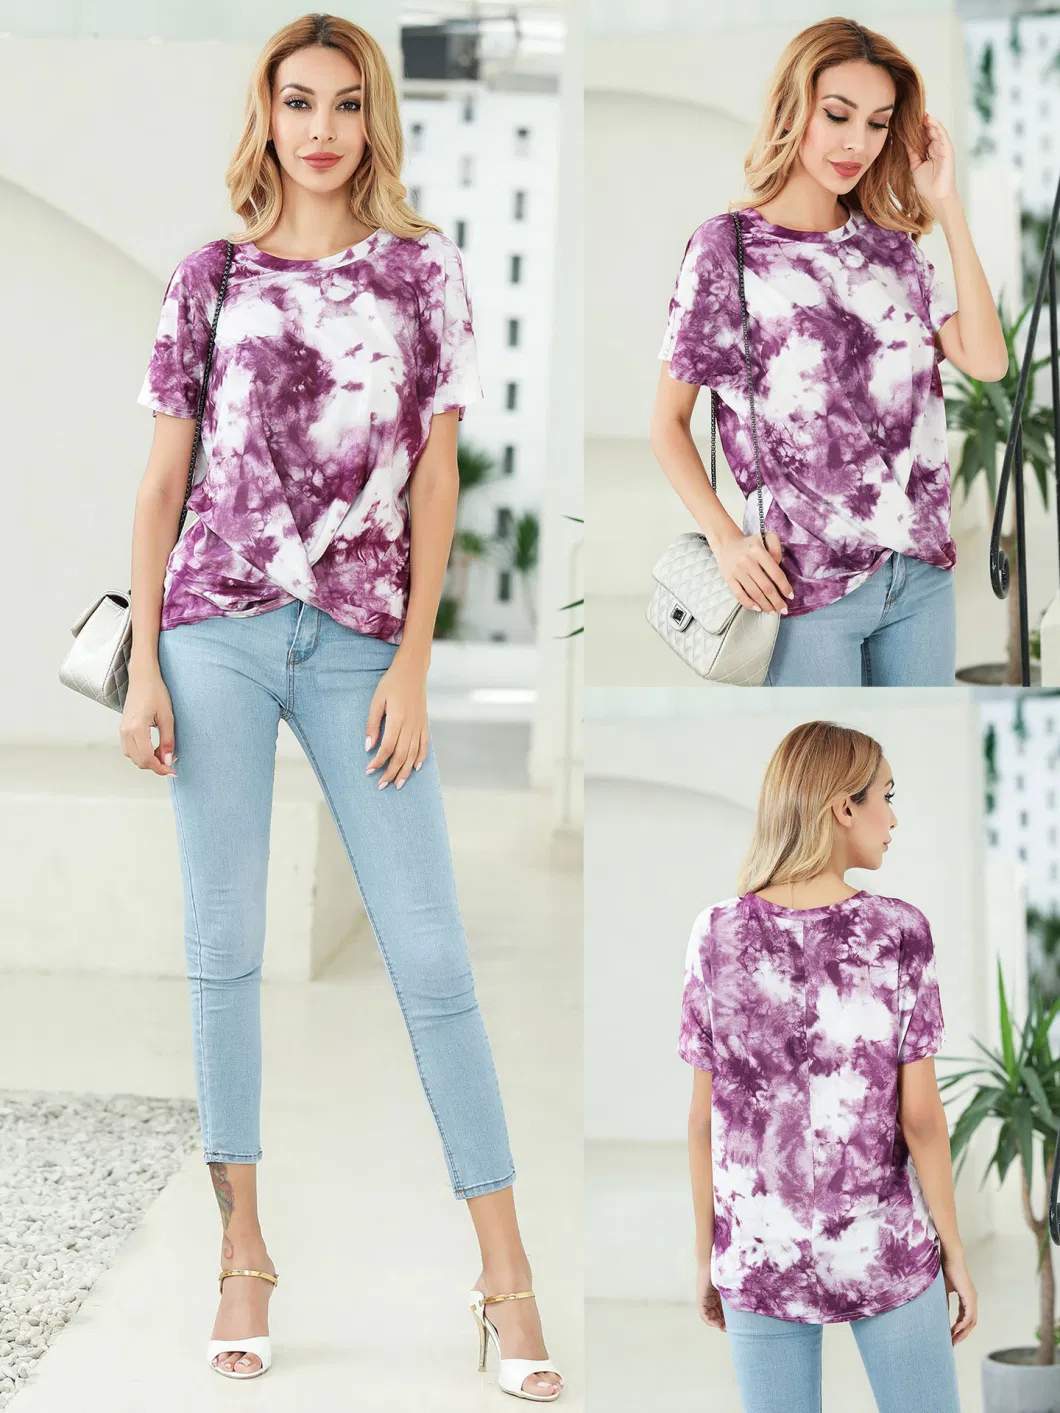 Customized Fashion Quantity Summer New Design New Trend Tie Dye Knotted Fashion T Shirt for Women Girls